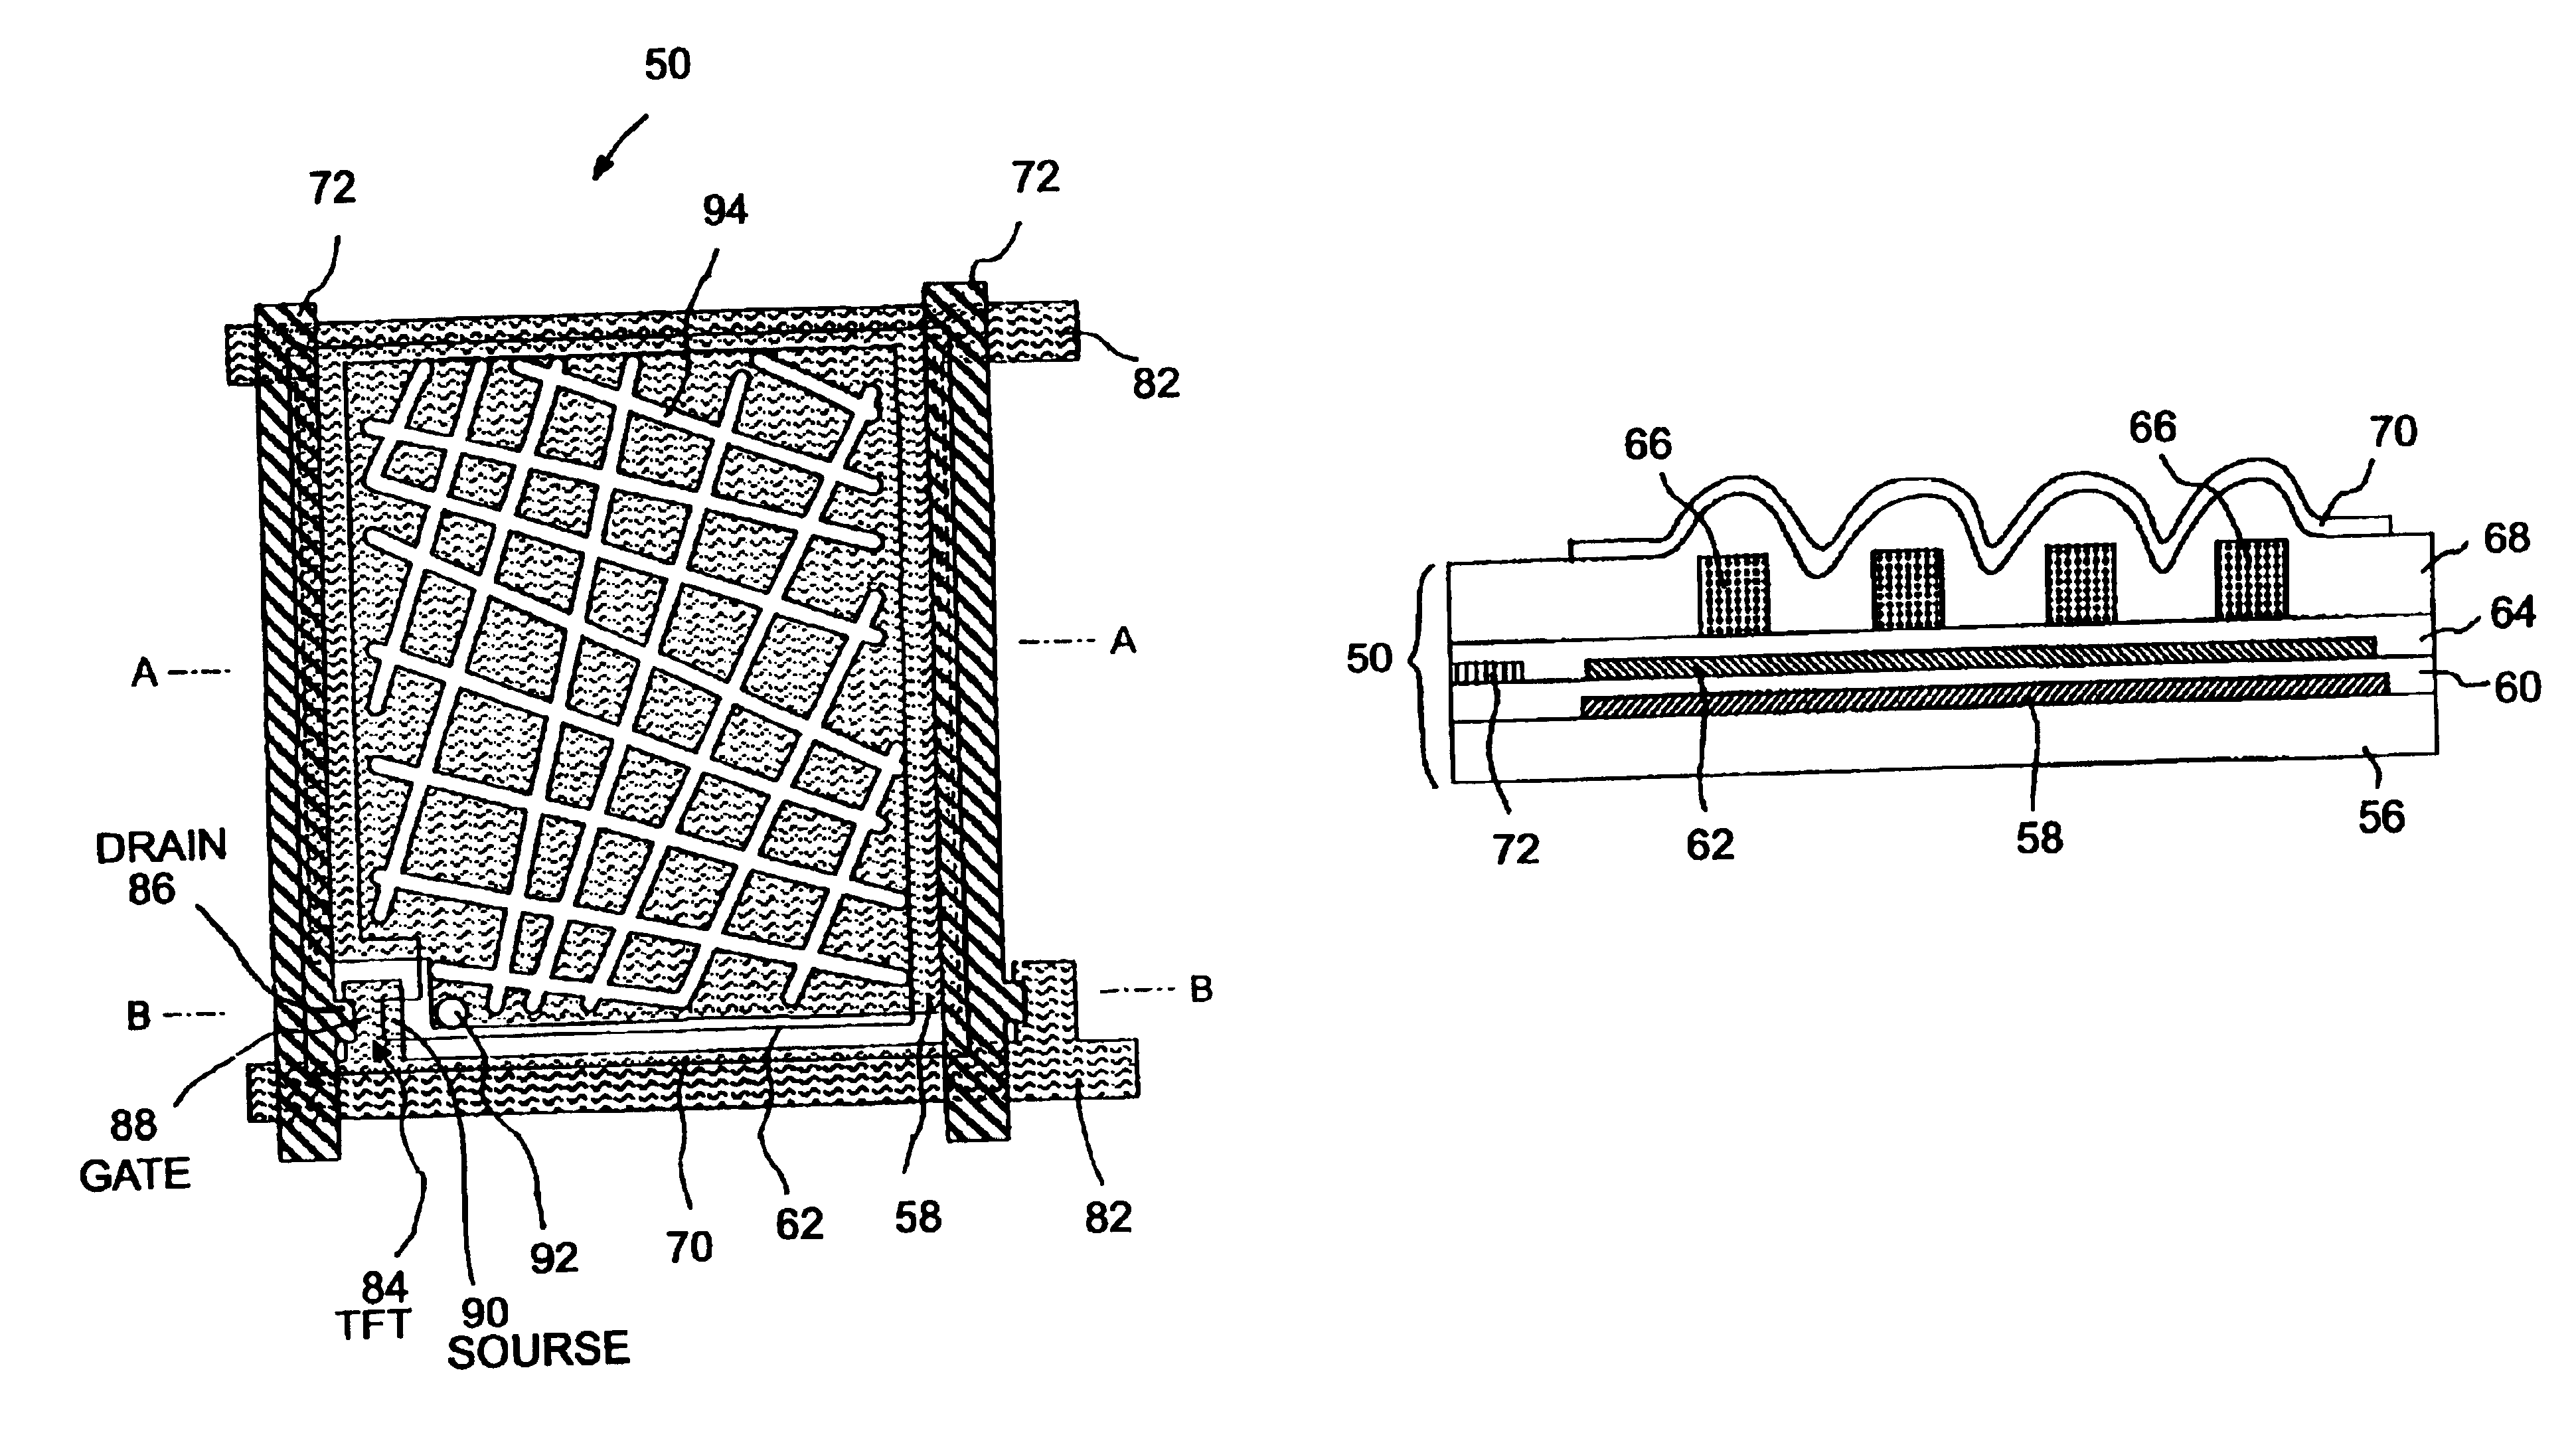 Active-matrix addressed reflective LCD and method of fabricating the same